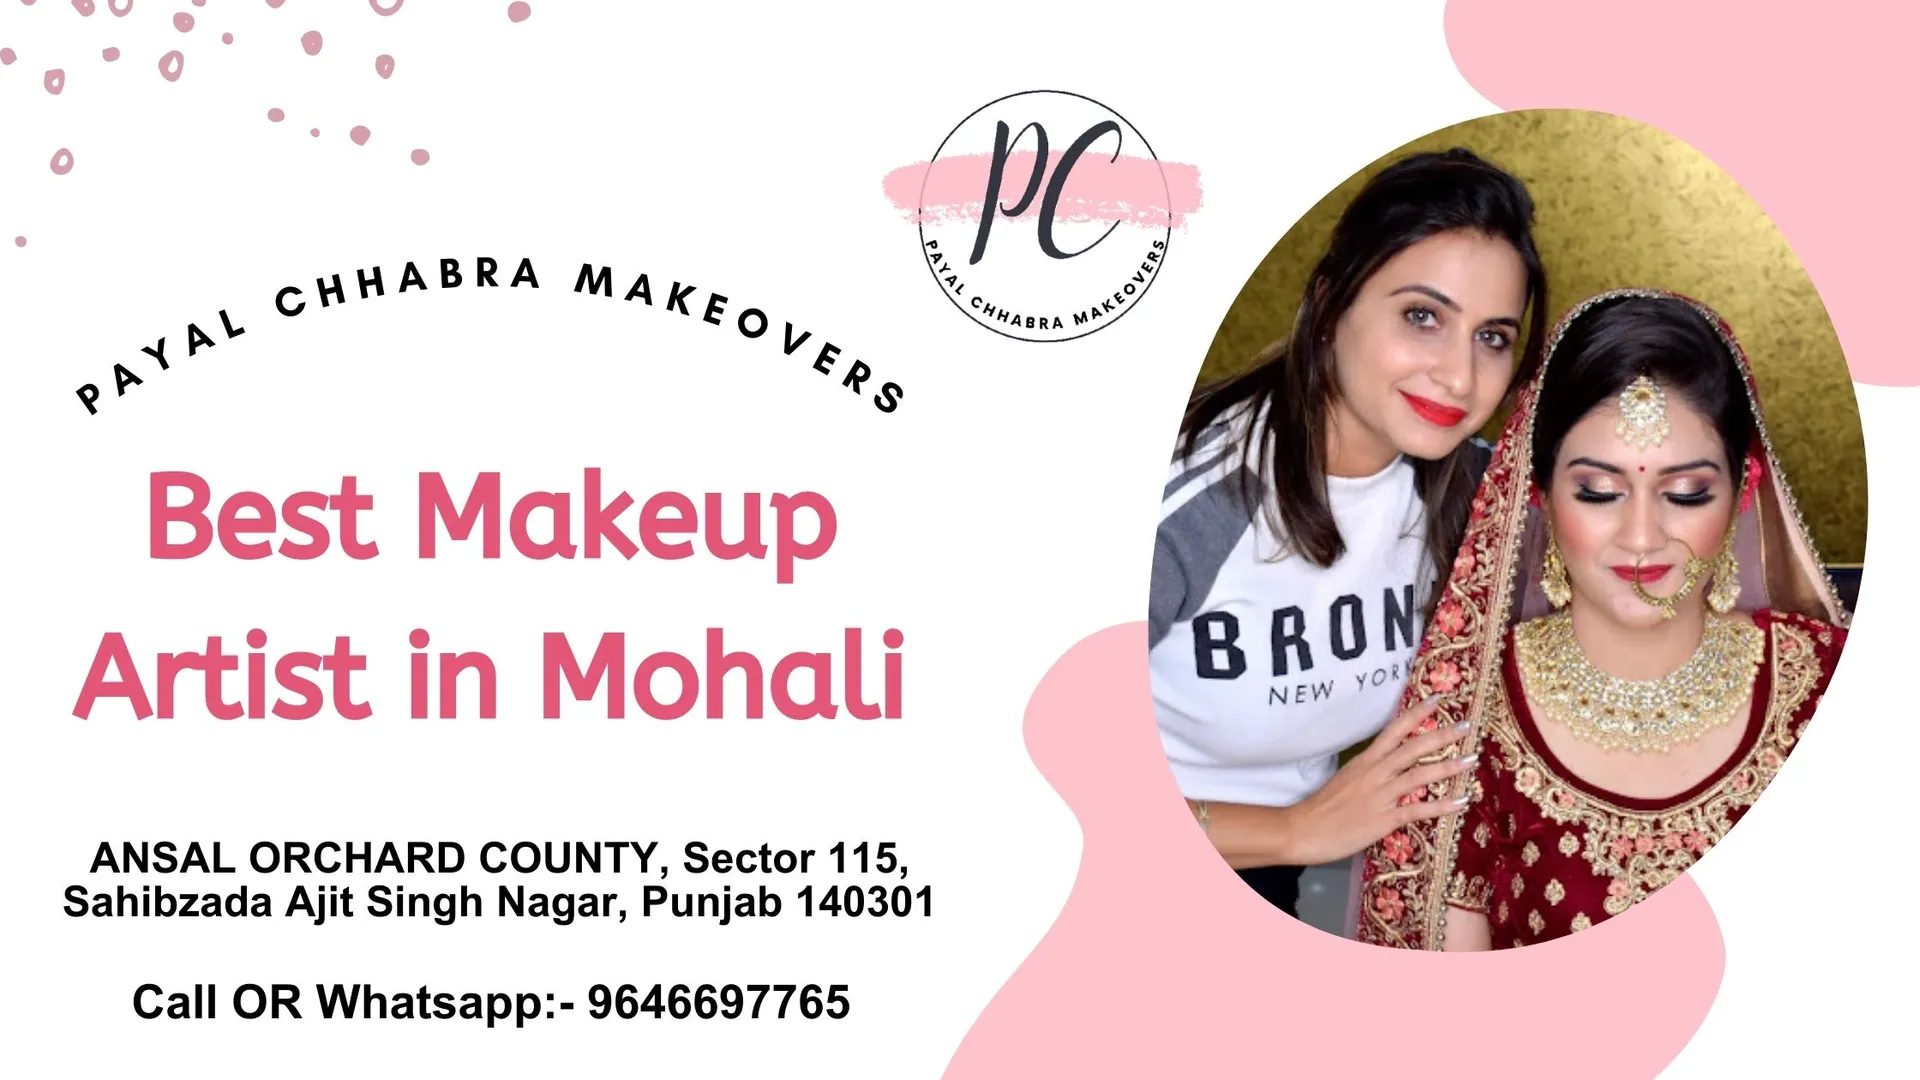 Unlock the Glamour within with Payal Chhabra Makeovers - Acclaimed as the Best Makeup Artist in Mohali

Step into a world of beauty and allure with Payal Chhabra, the unrivaled best makeup artist in Mohali. With a mastery of artistry and an eye for detail, Payal Chhabra creates captivating makeovers that enhance your natural features and elevate your confidence.

Book your appointment today. https://g.co/kgs/7eMr4B